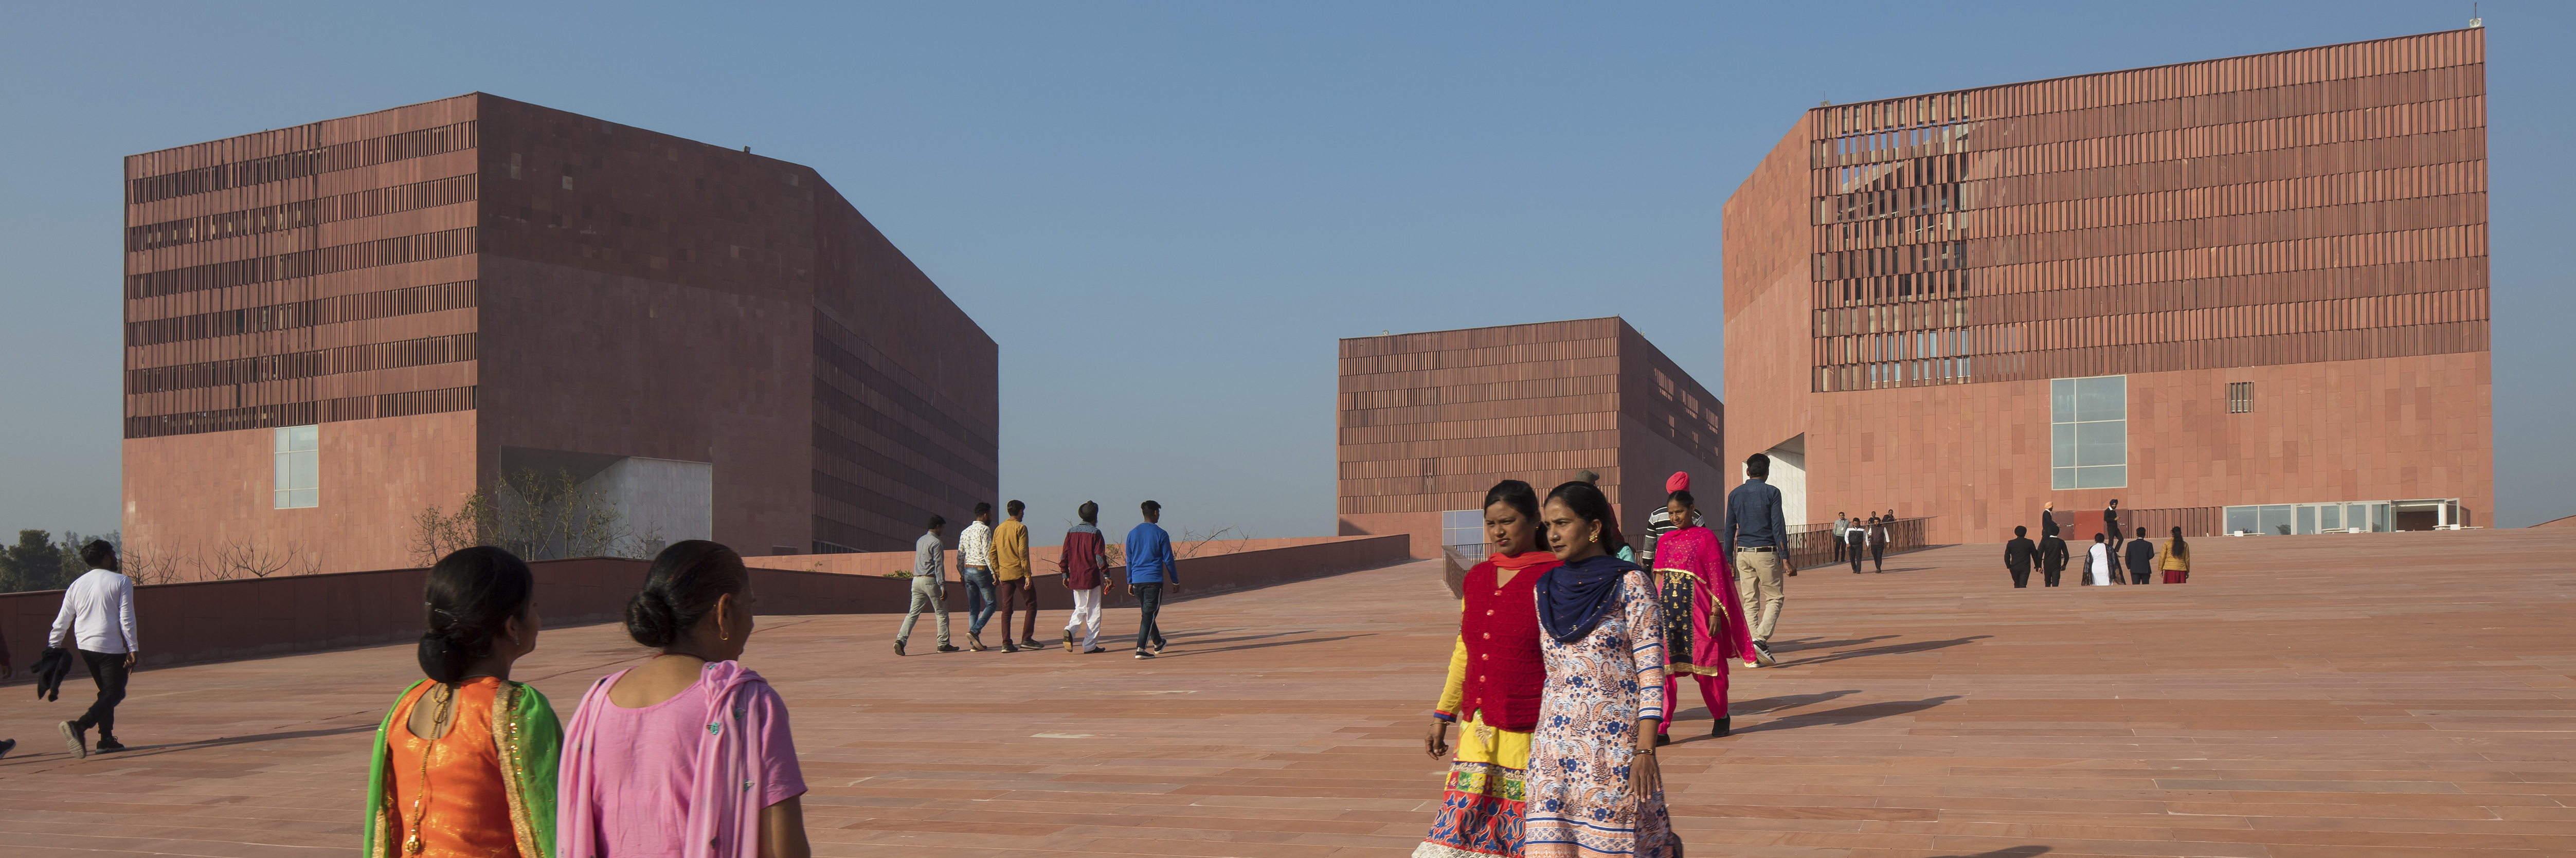 Footpath on the campus of Thapar University, Patiala, India, with students in front of a very modern building designed by McCullough Mulvin Architects, against a blue sky. 